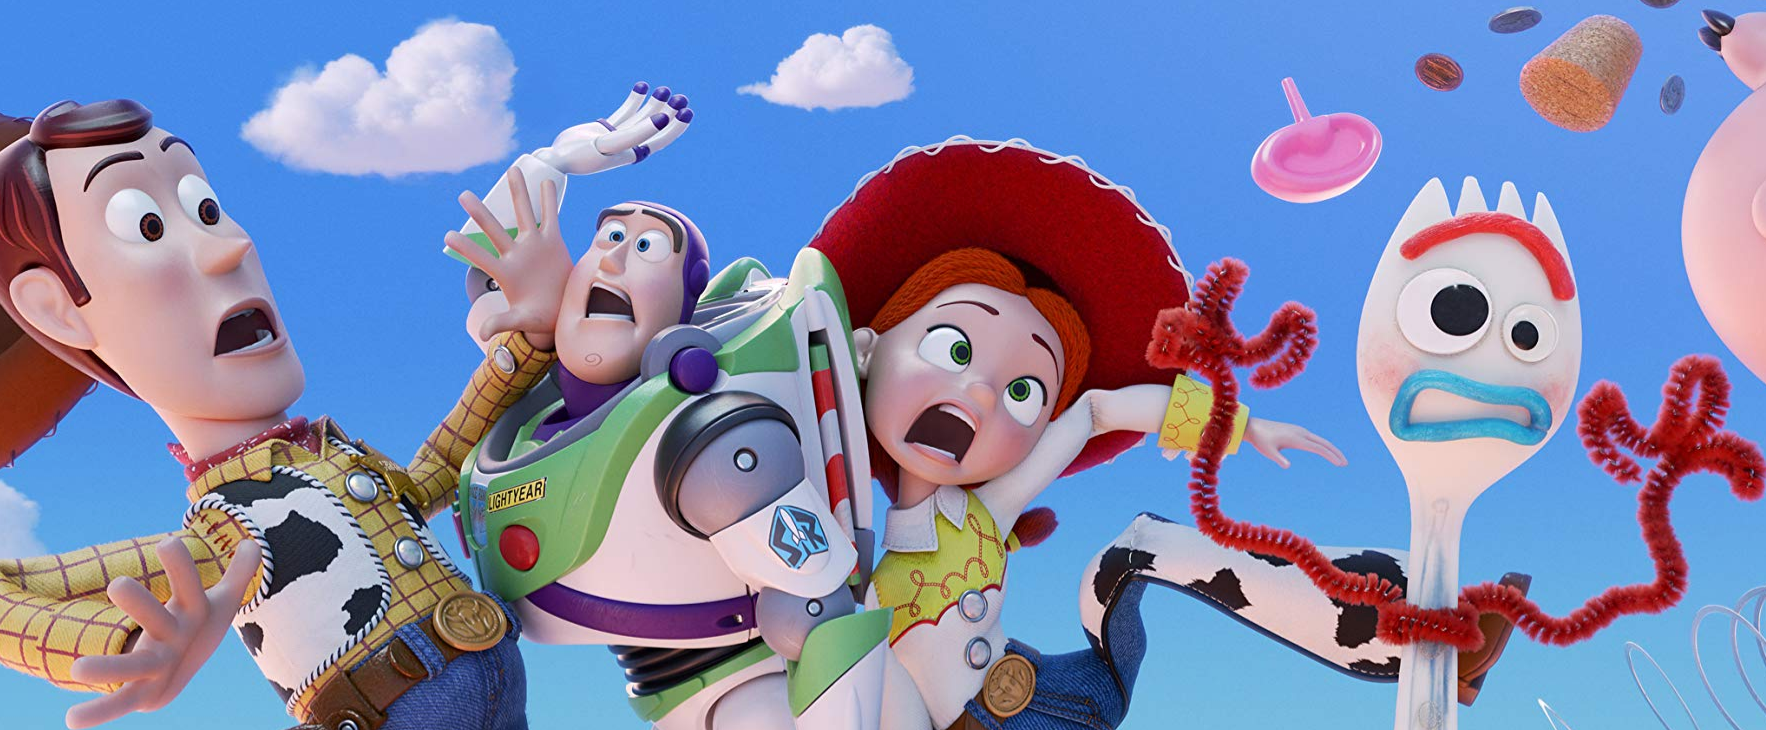 Hot Take We Hated Toy Story 4 Hear Us Out If You Ve Followed The By Poor Snobs Poor Snobs Medium